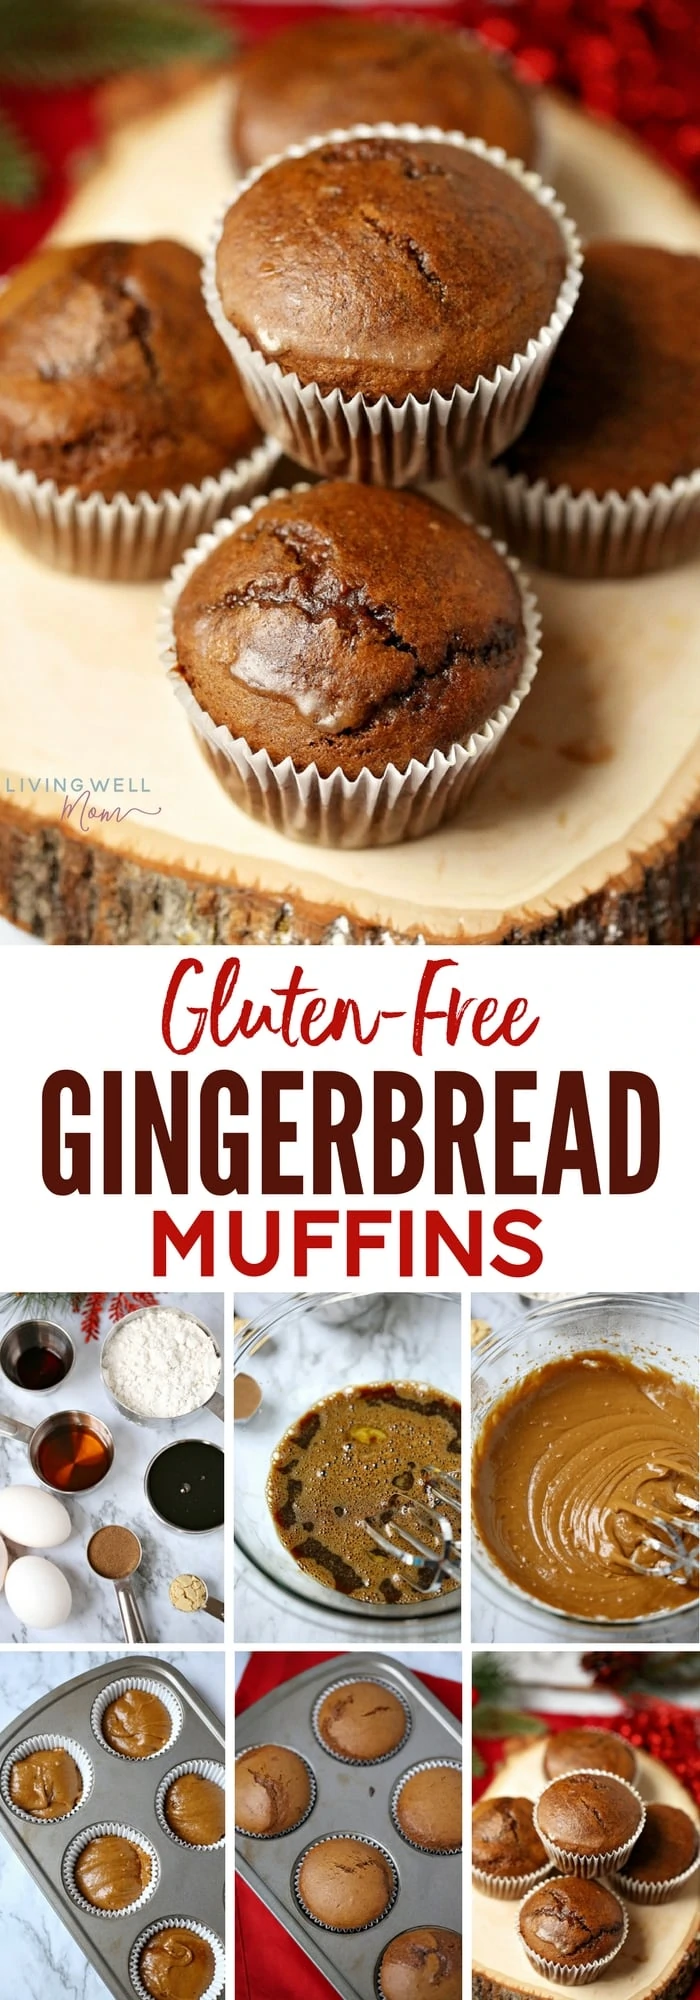 collection of photos - gluten-free gingerbread muffins